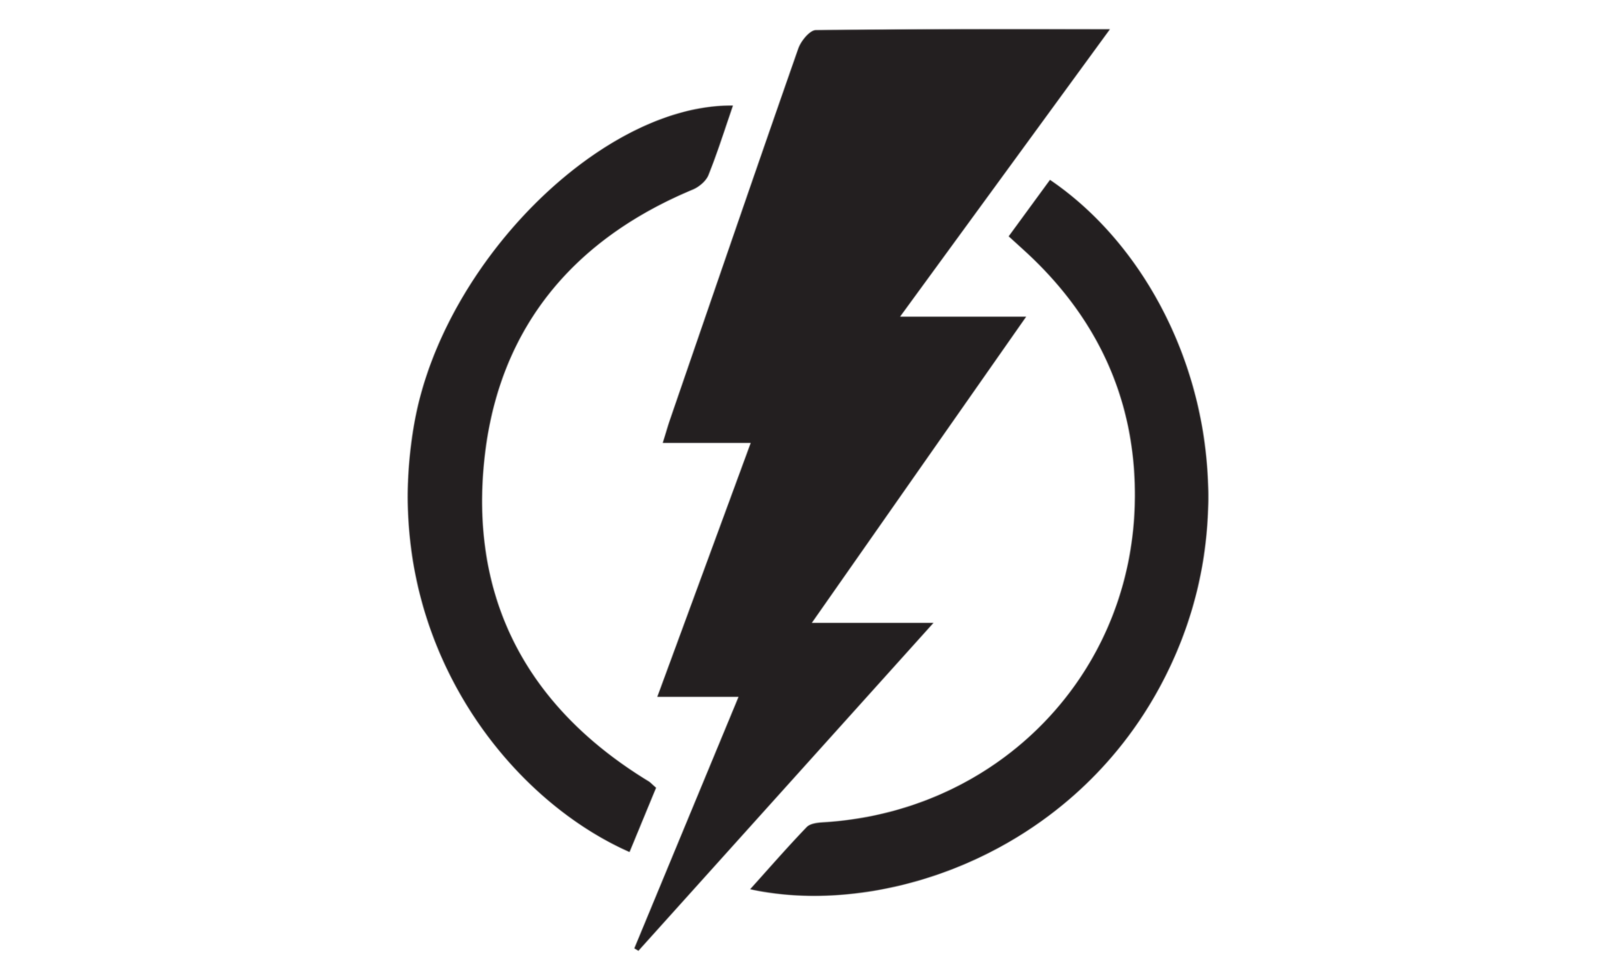 Icon of energy thunder lightning bolt symbol or electricity power electric sign symbol png